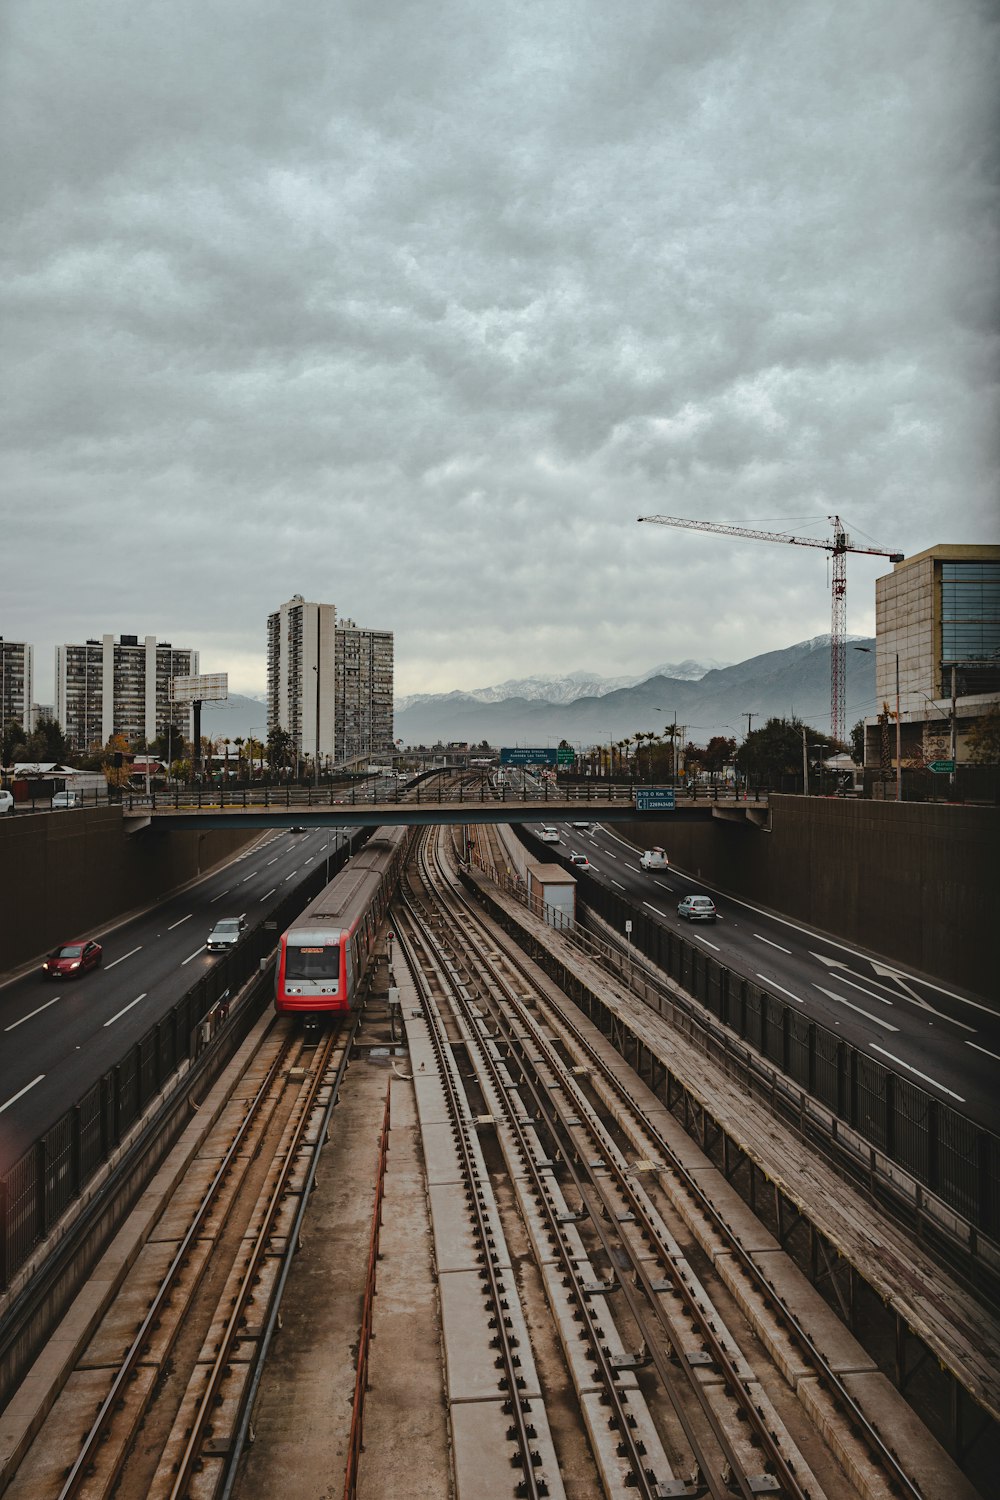 a red train traveling down train tracks next to tall buildings